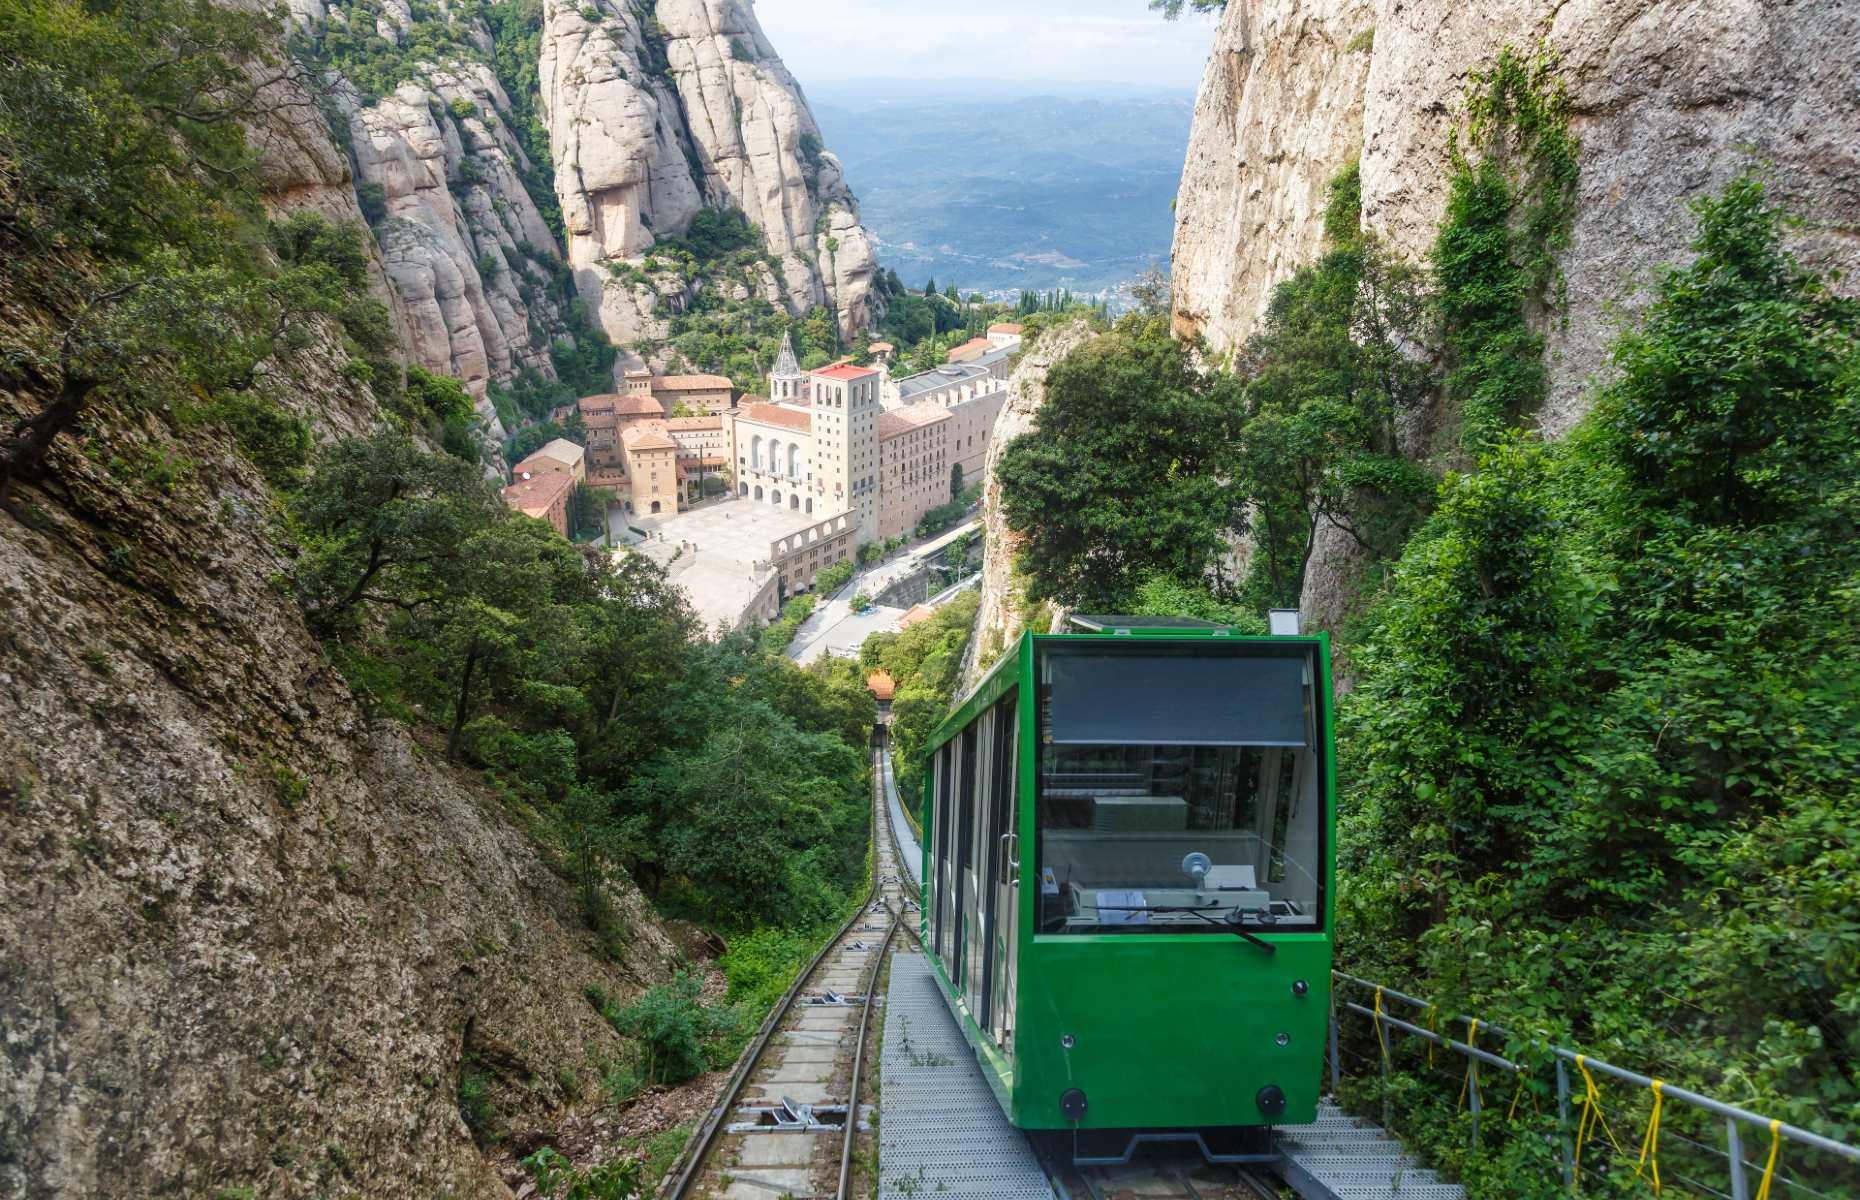 <p>The storied mountaintop monastery of Montserrat is one of the most gorgeous parts of Catalonia – but did you know you can reach it by train? The <a href="https://bcnshop.barcelonaturisme.com/shopv3/en/product/615/tot-montserrat.html">ToT Montserrat</a> is an ultra-scenic route which runs between Barcelona and the foothills of the peak, at which point you can choose between taking the cable car (Aeri) or the rack railway (Cremallera) up to the Montserrat Monastery. Whichever option you go for, you’ll be rewarded with sweeping vistas across the rugged valley.</p>